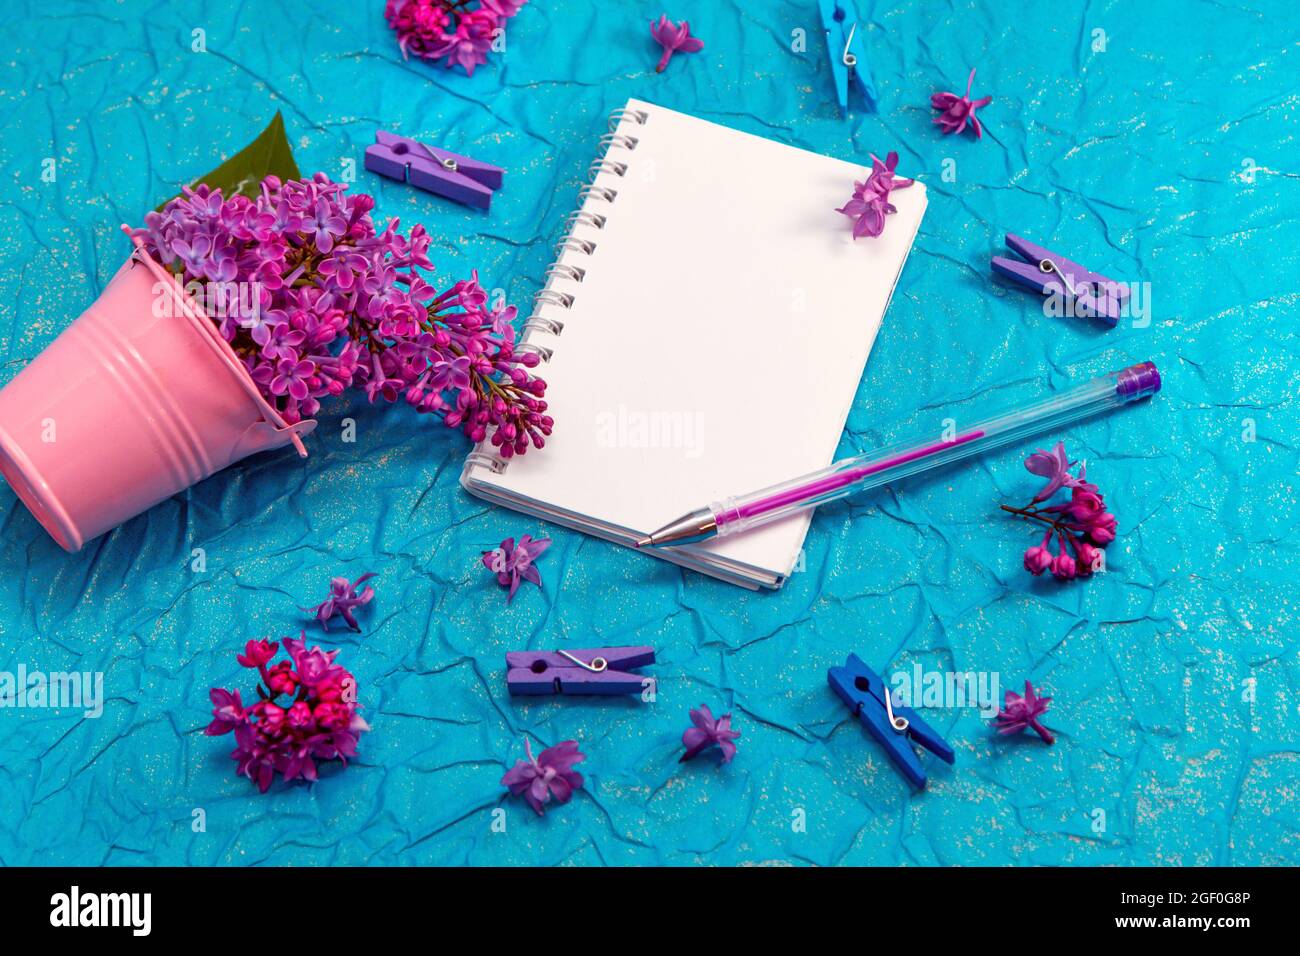 Blank notebook, pen with purple ink and lilac flowers on vintage painted blue cardboard background Stock Photo